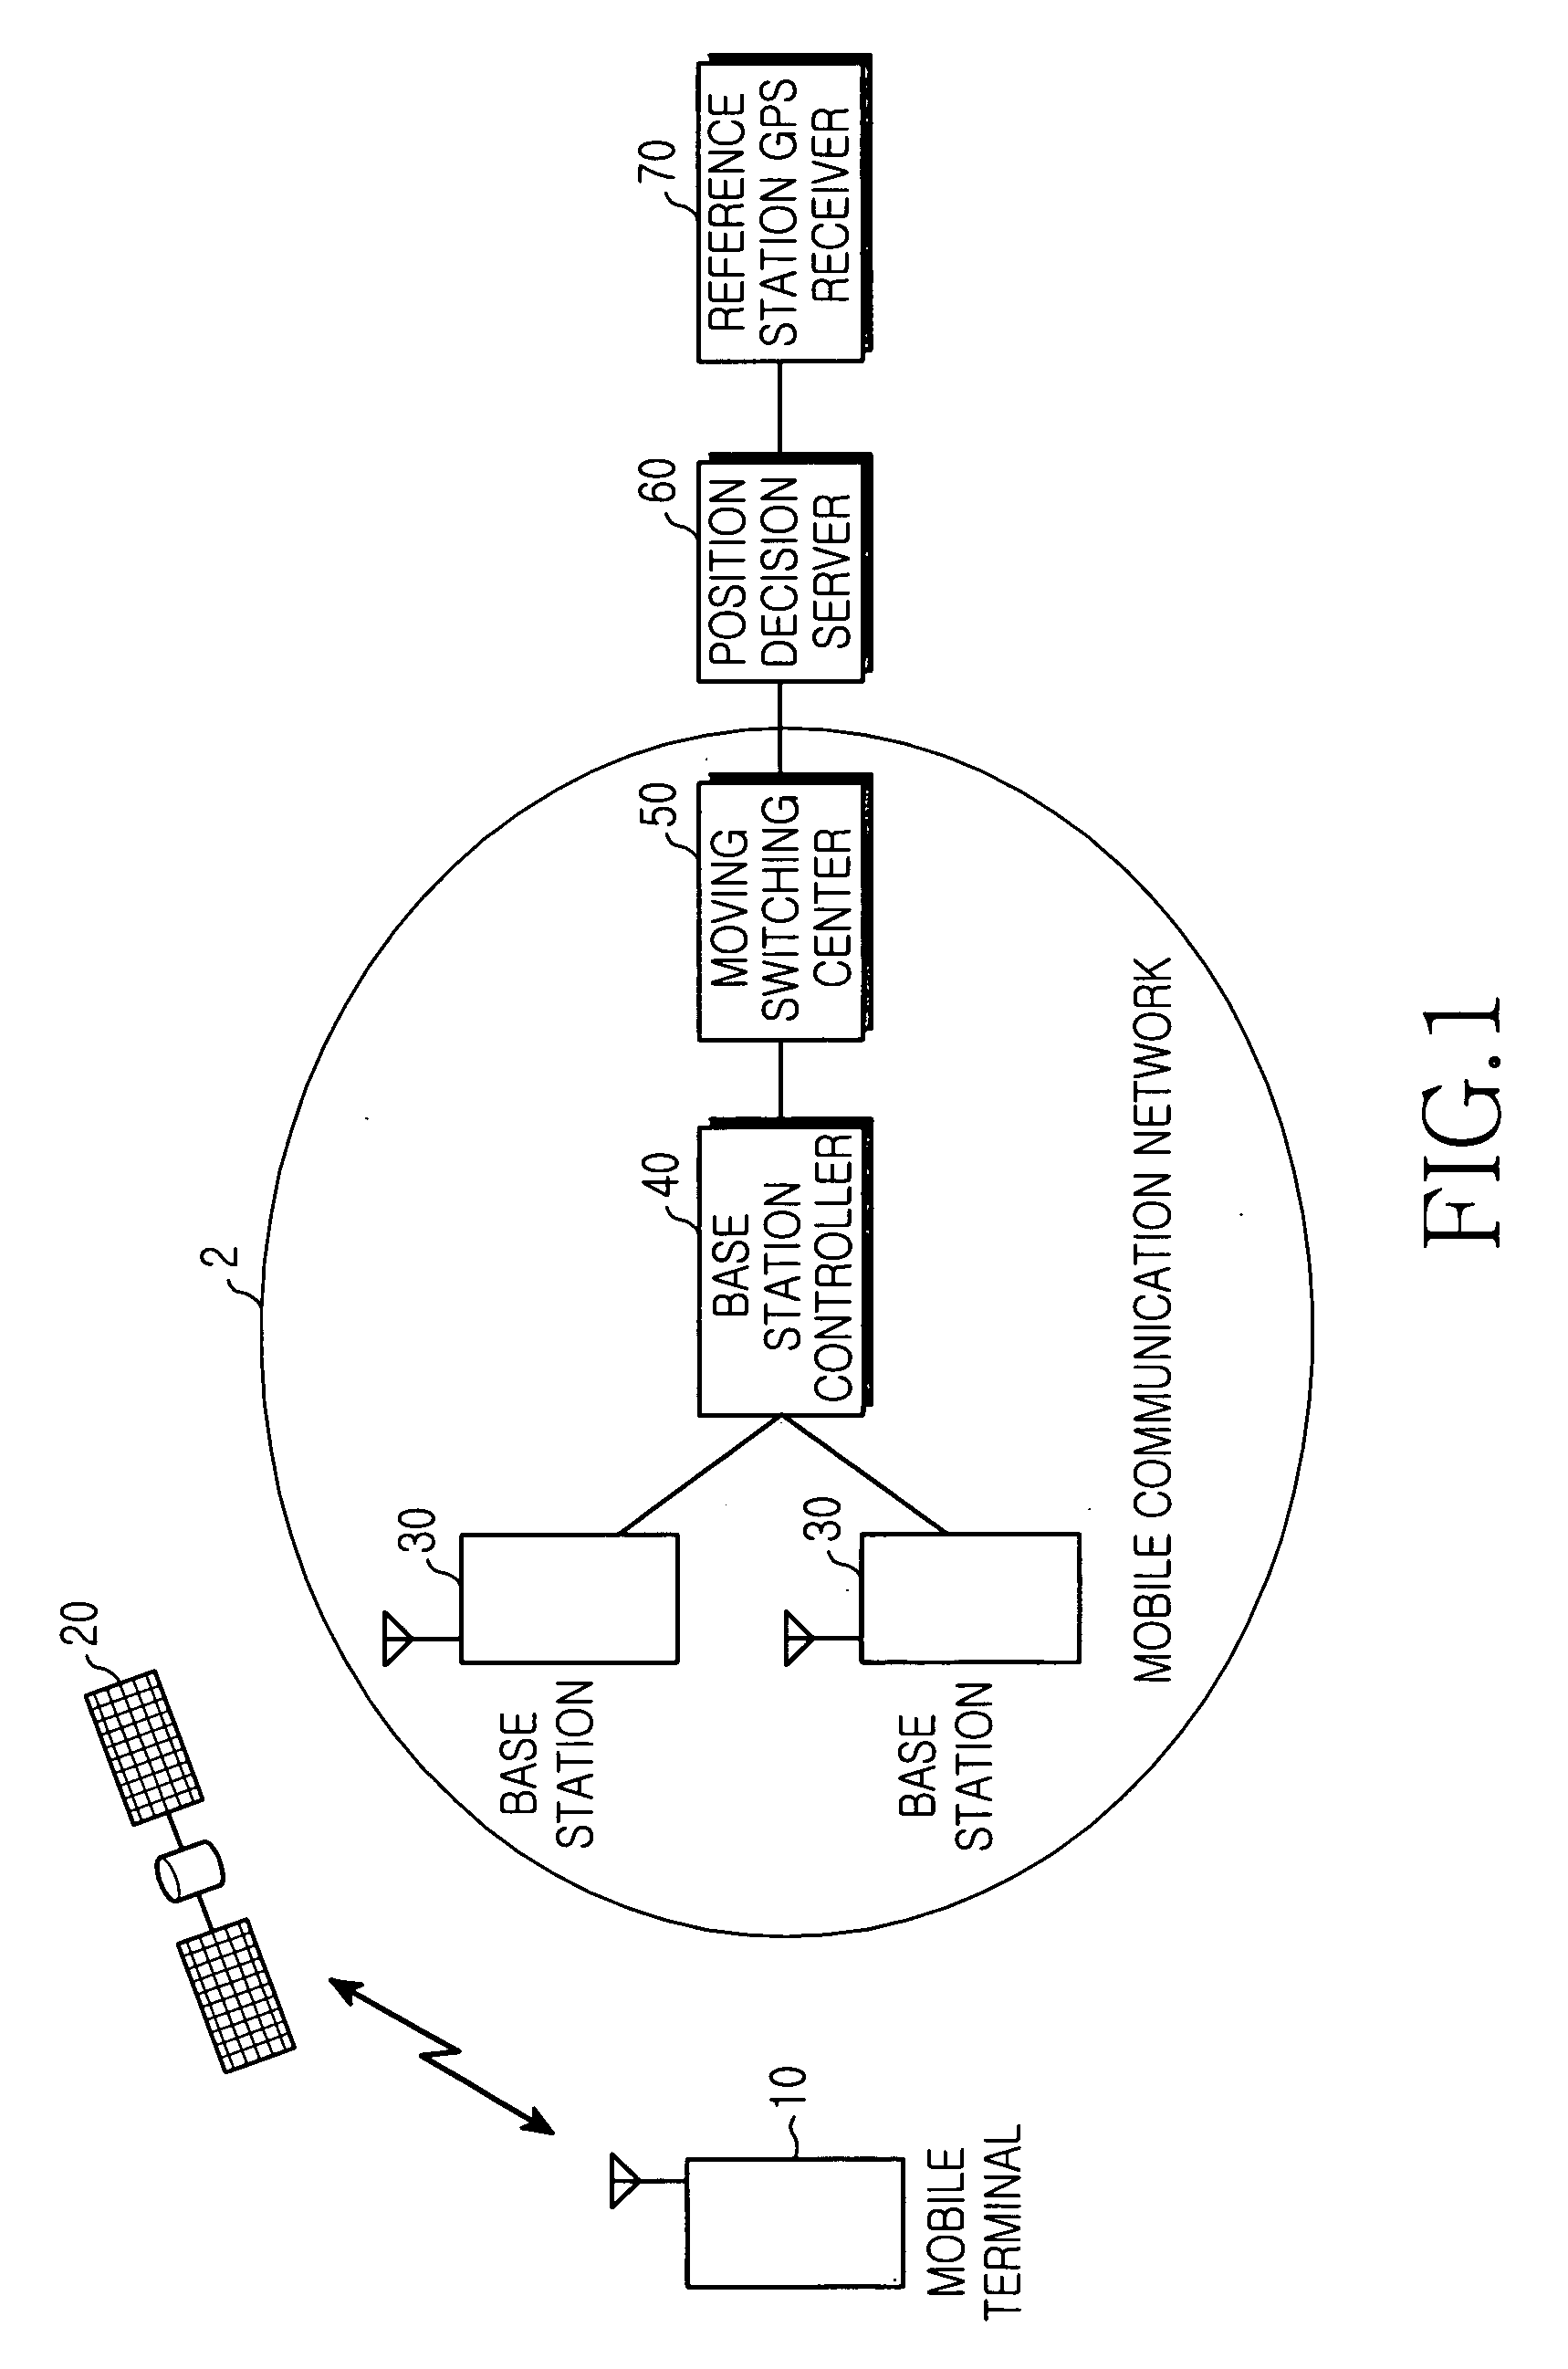 Method for decision of time delay by repeater in mobile communication network